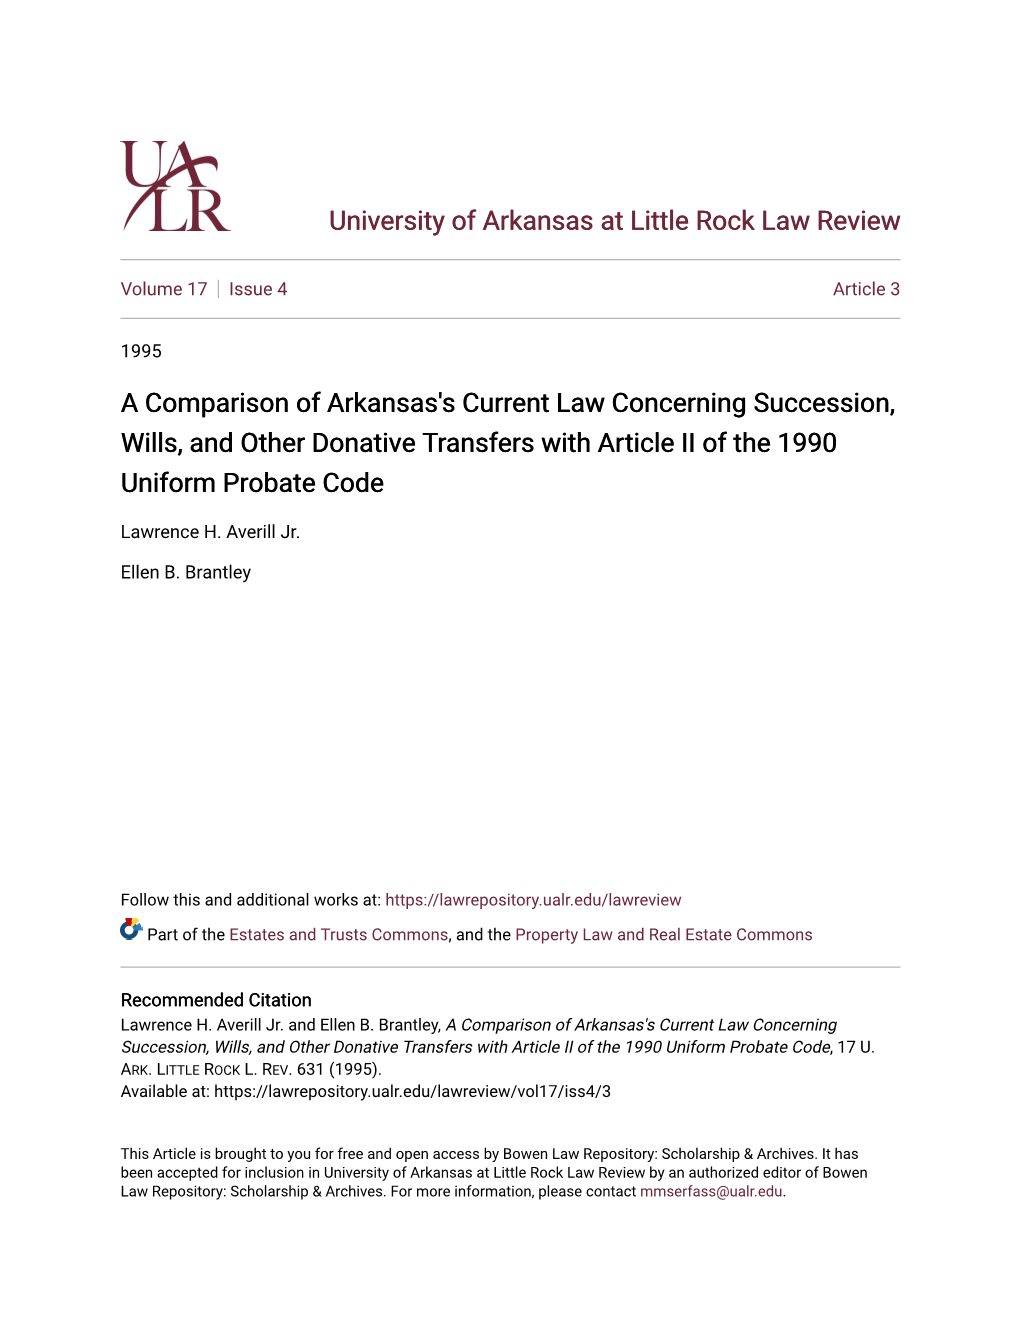 A Comparison of Arkansas's Current Law Concerning Succession, Wills, and Other Donative Transfers with Article II of the 1990 Uniform Probate Code